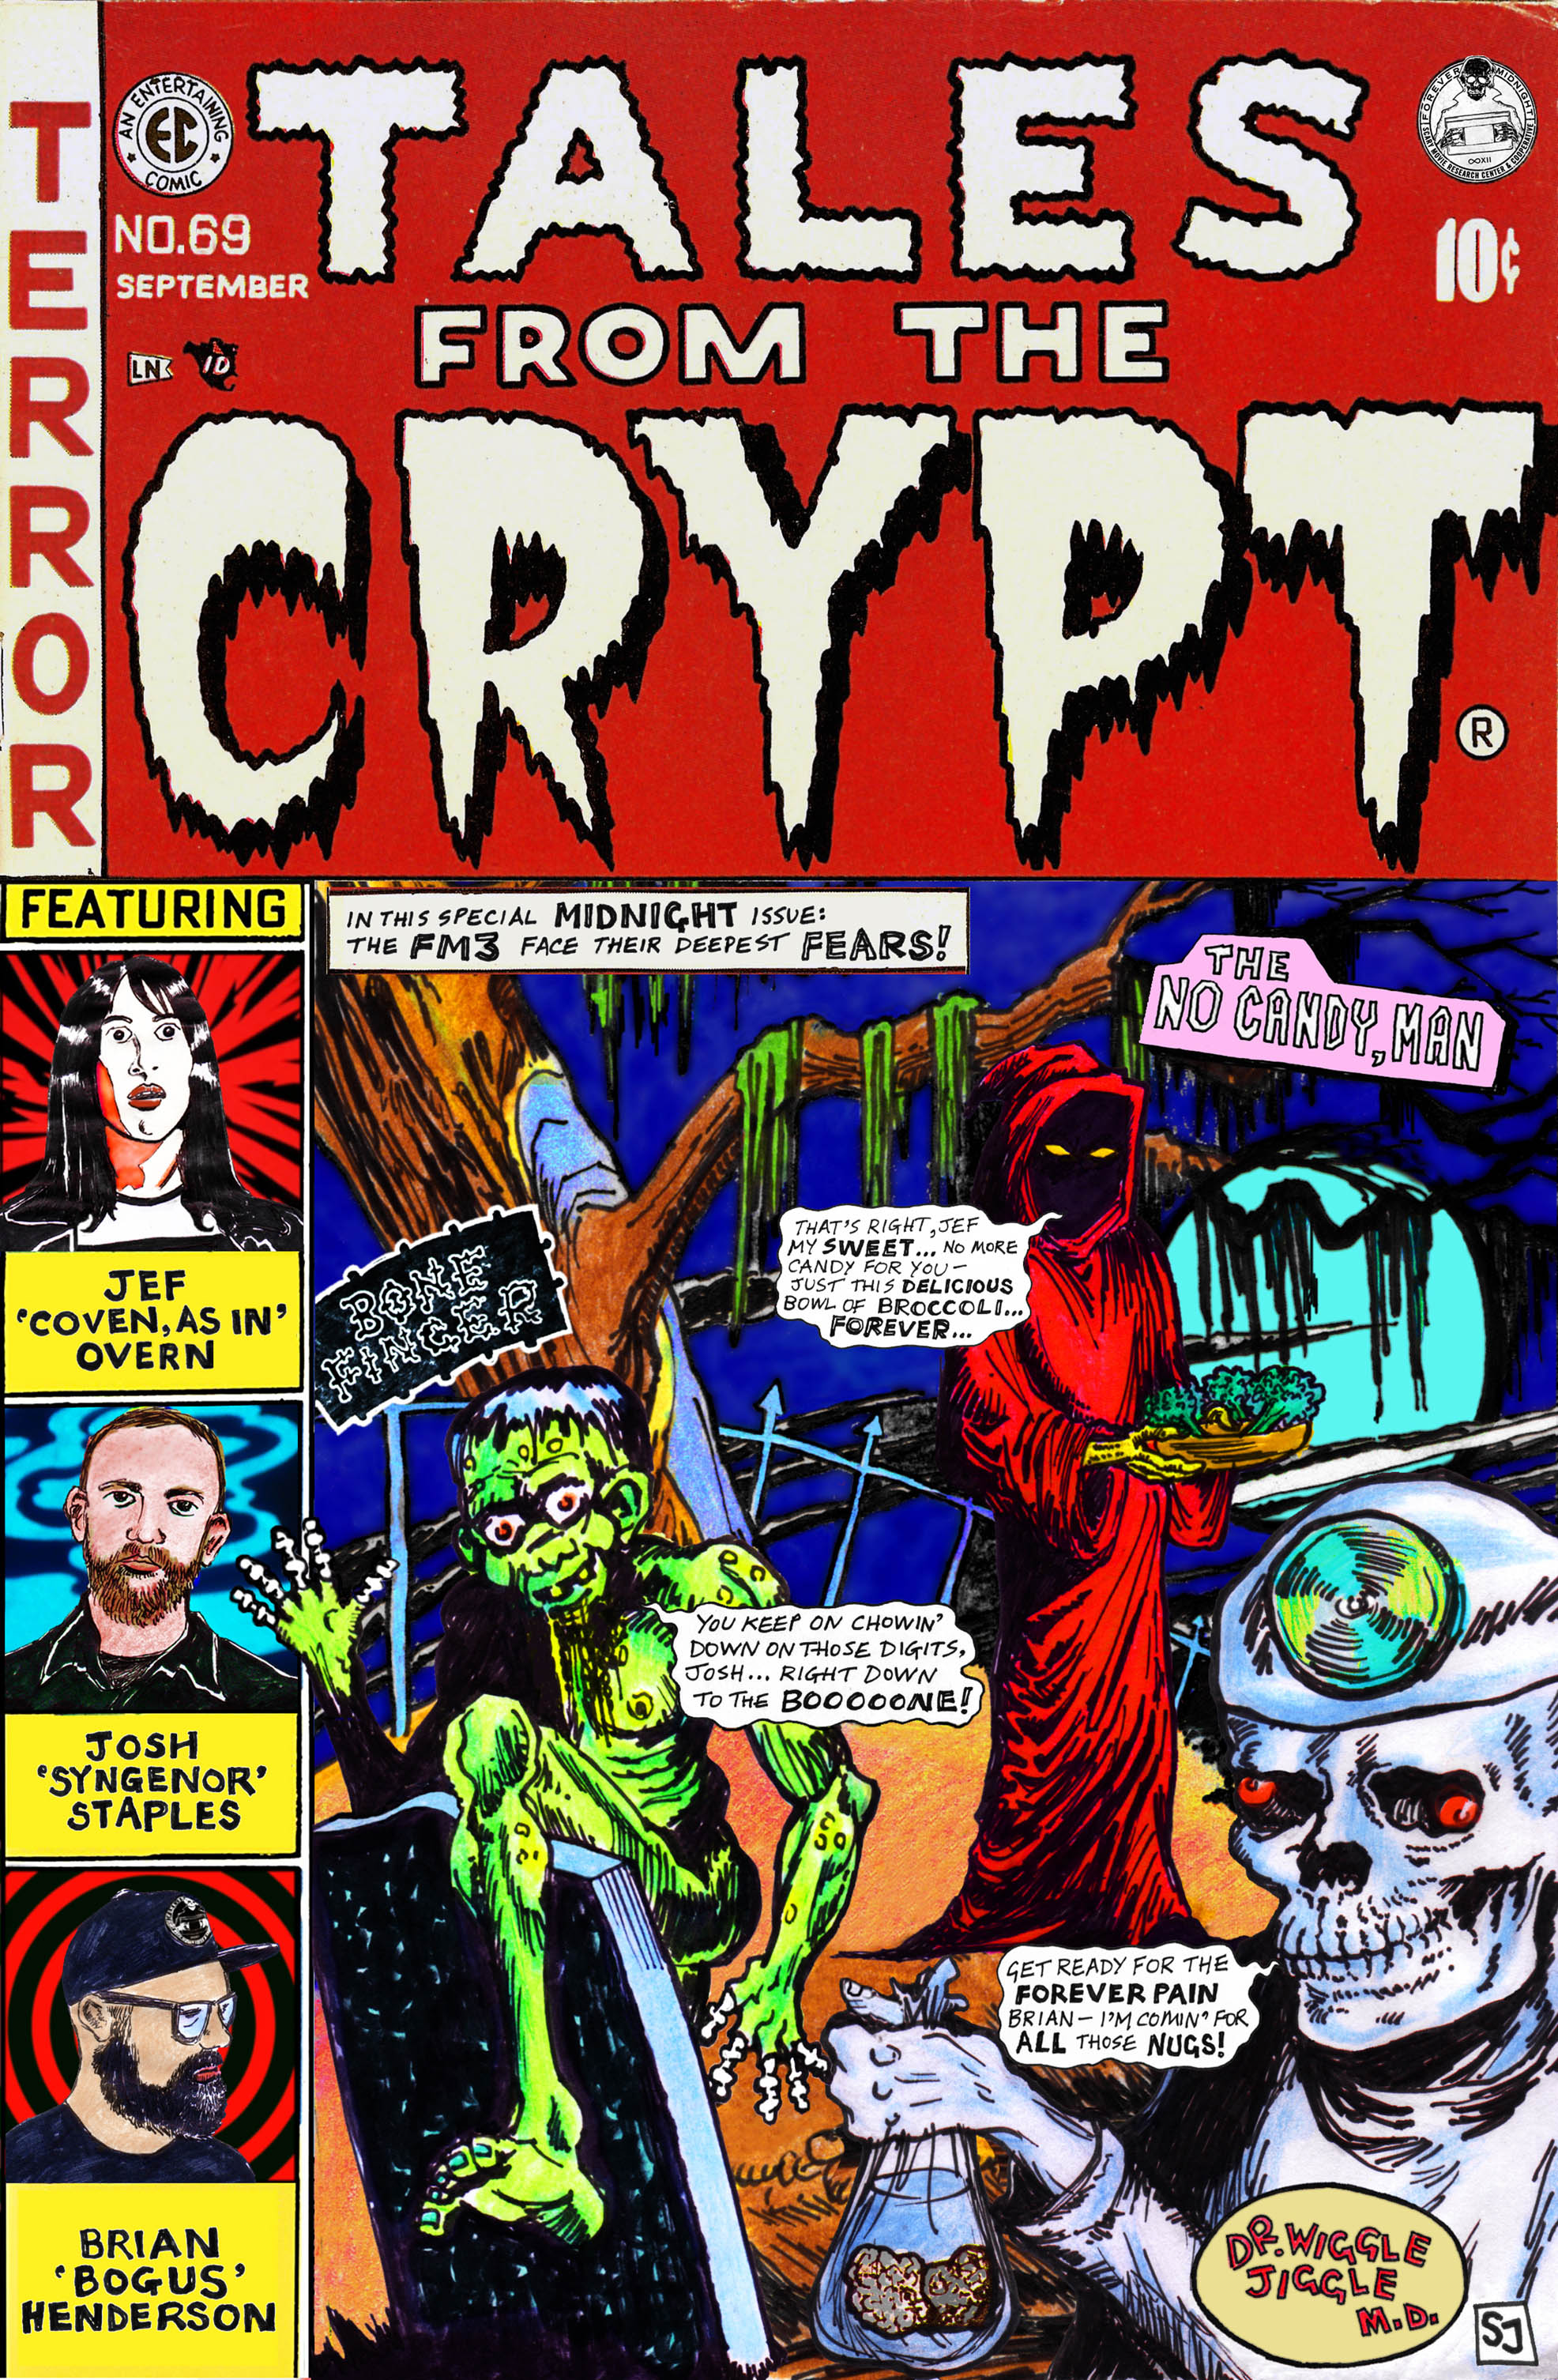 FM3 Tales from the Crypt Cover COVER PRINT.jpg